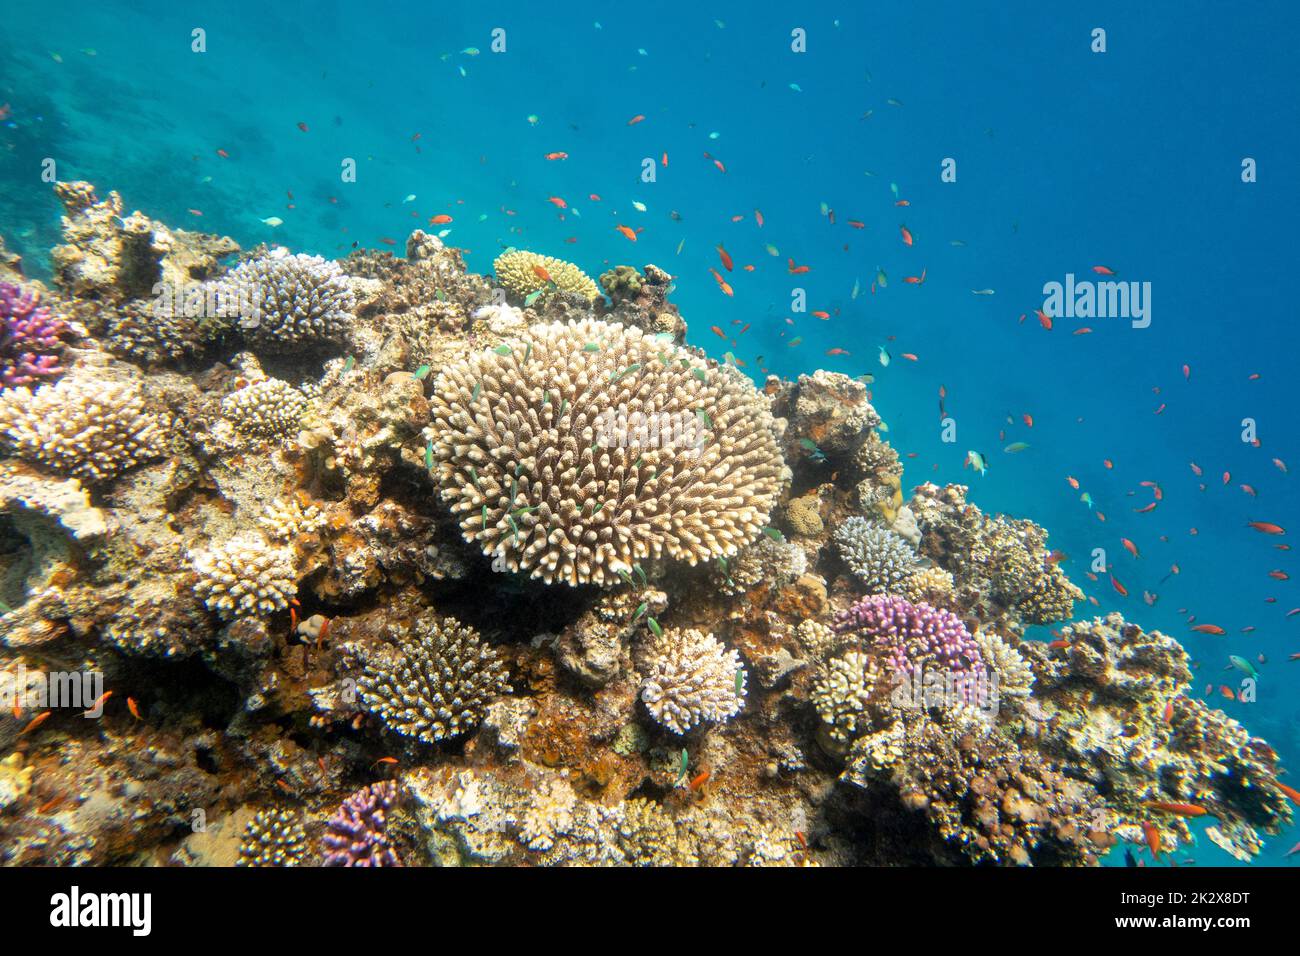 Colorful, picturesque coral reef at the sandy bottom of tropical sea, hard corals with green chromis fishes, underwater landscape Stock Photo